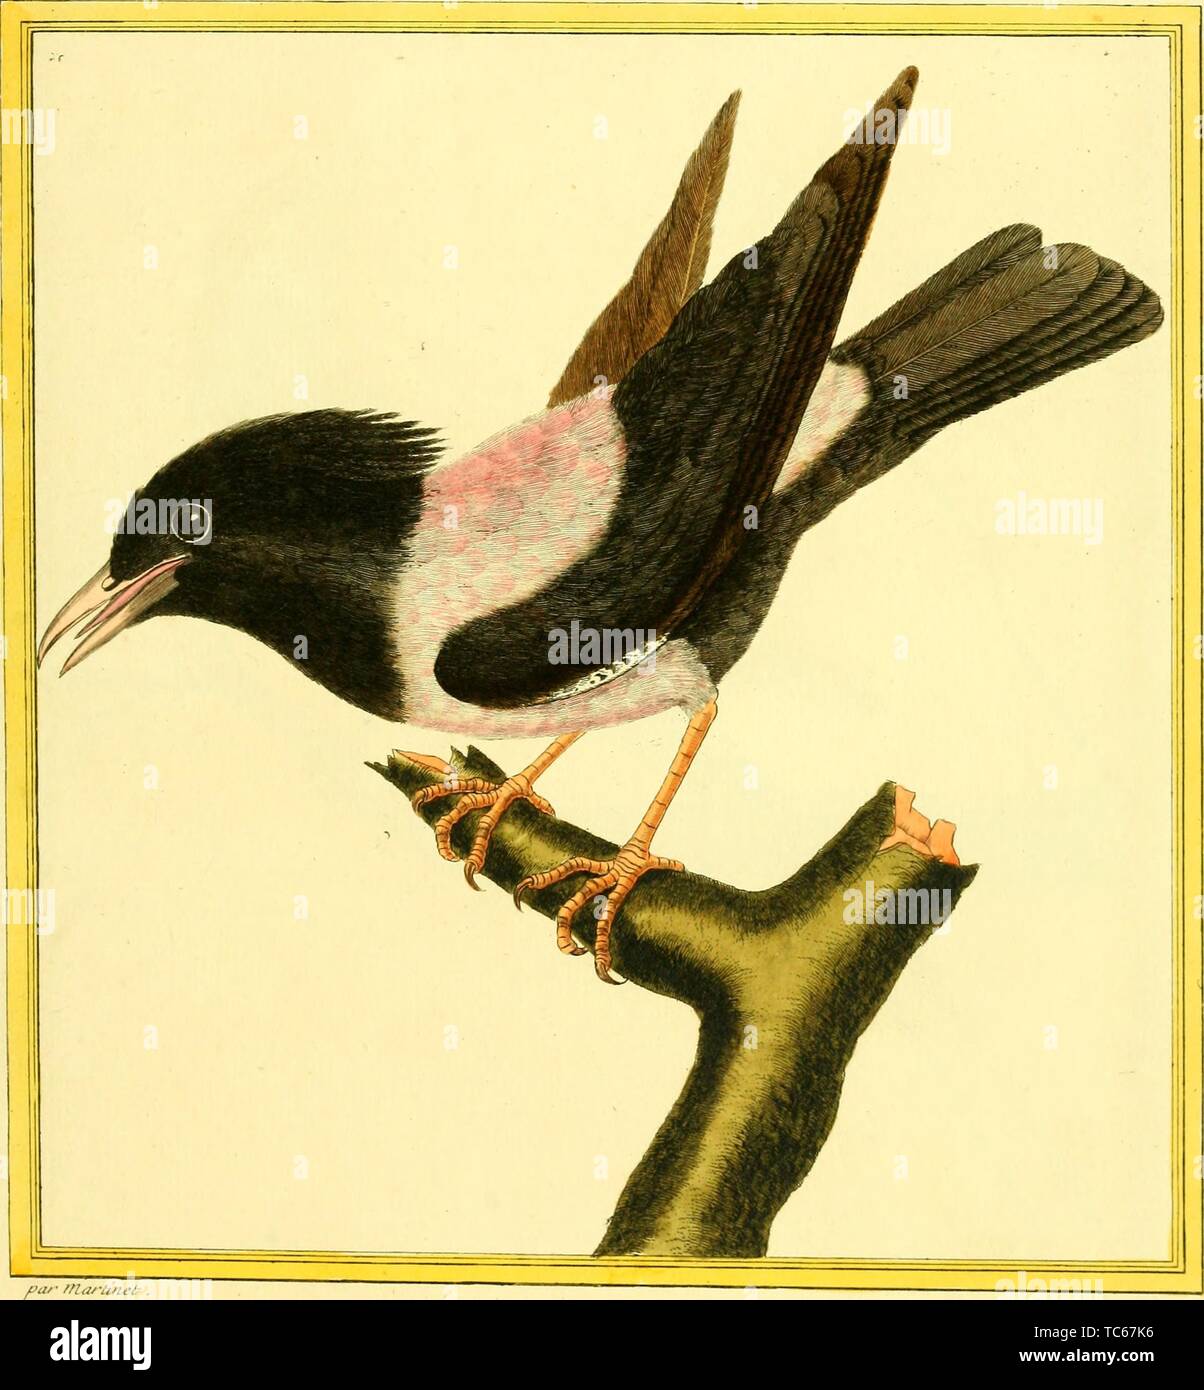 Engraved drawing of the Rosy Starling (Pastor roseus), from the book 'Planches enluminees Dhistoire naturelle' by Francois Nicolas, Louis Jean Marie Daubenton, and Edme-Louis Daubenton, 1765. Courtesy Internet Archive. () Stock Photo